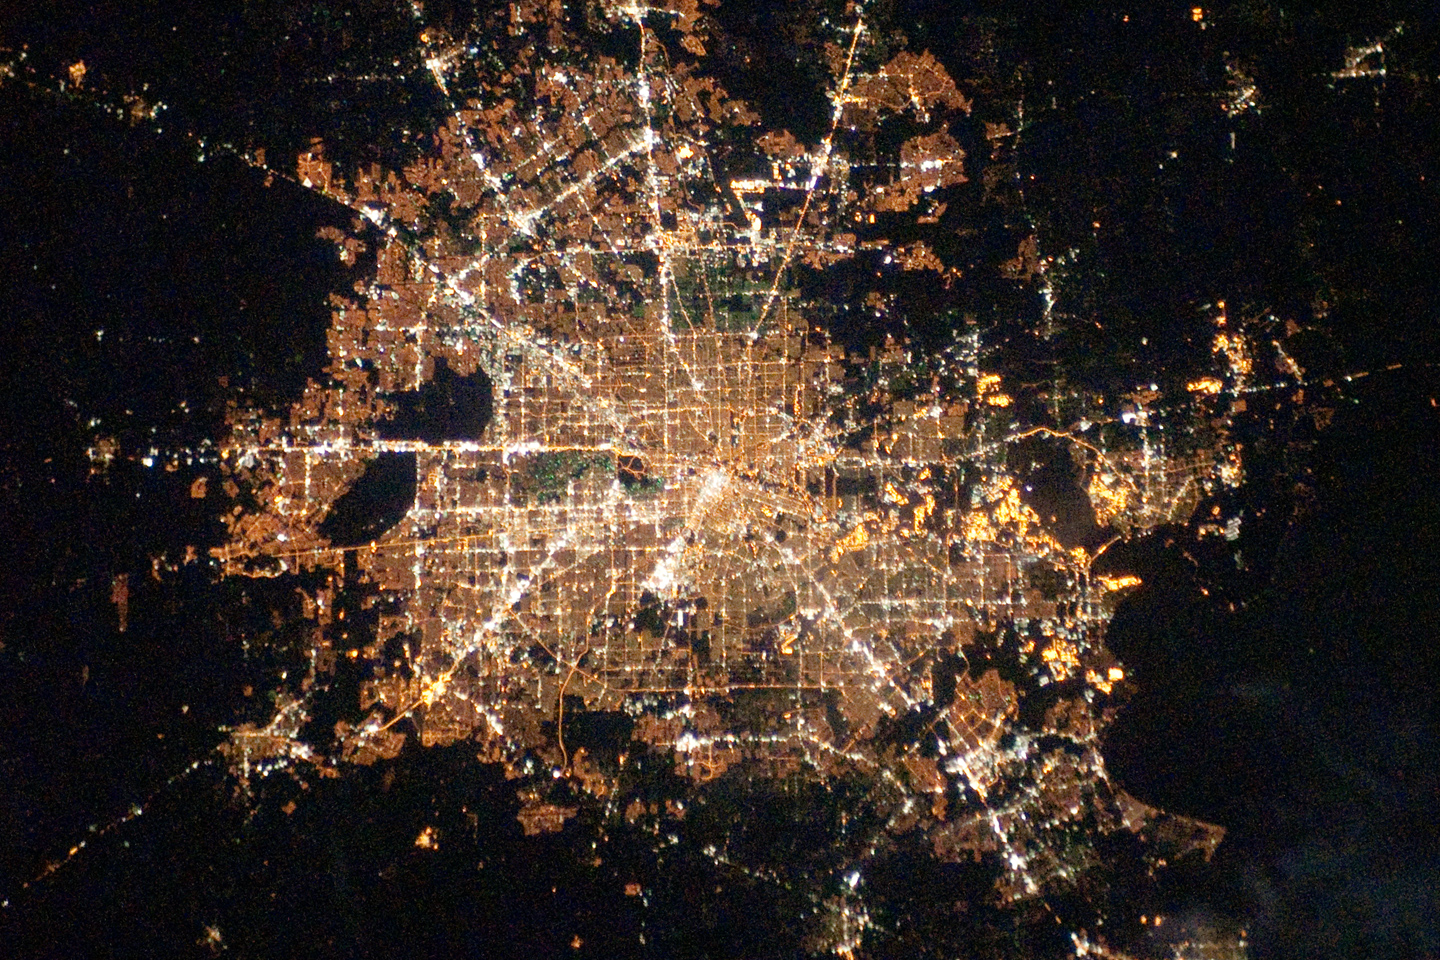 Houston, Texas at Night : Image of the Day